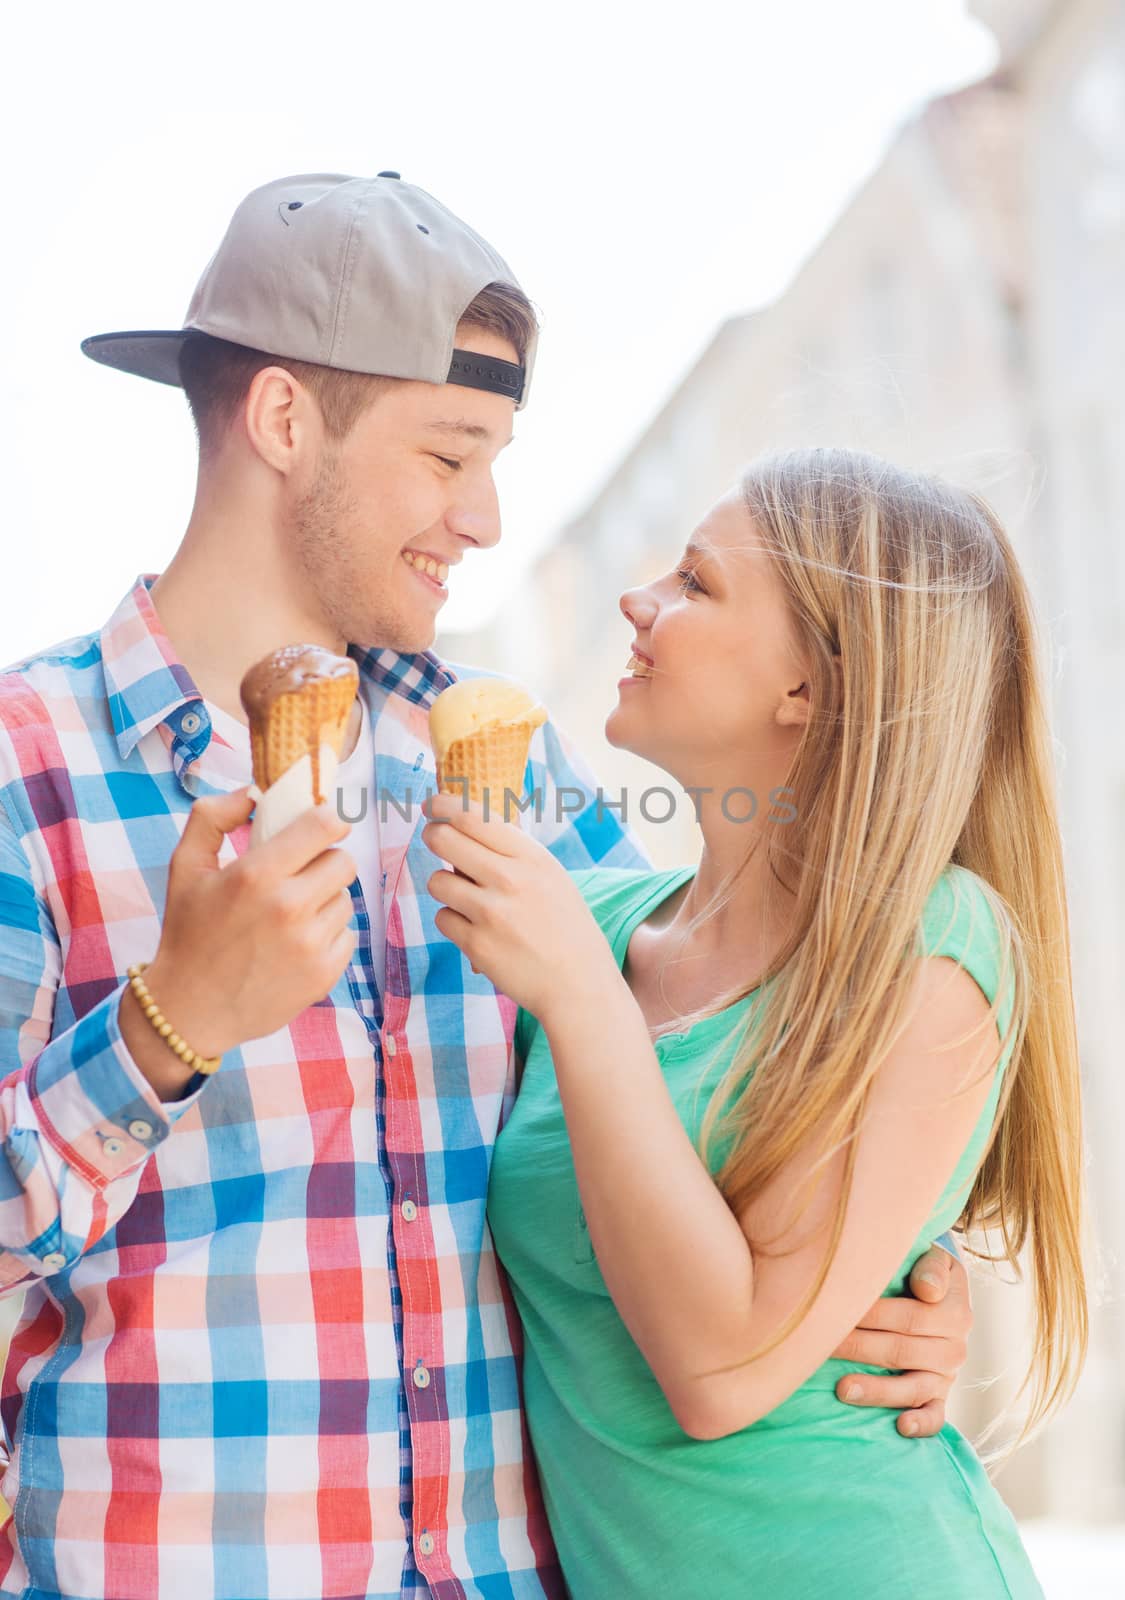 smiling couple with ice-cream in city by dolgachov